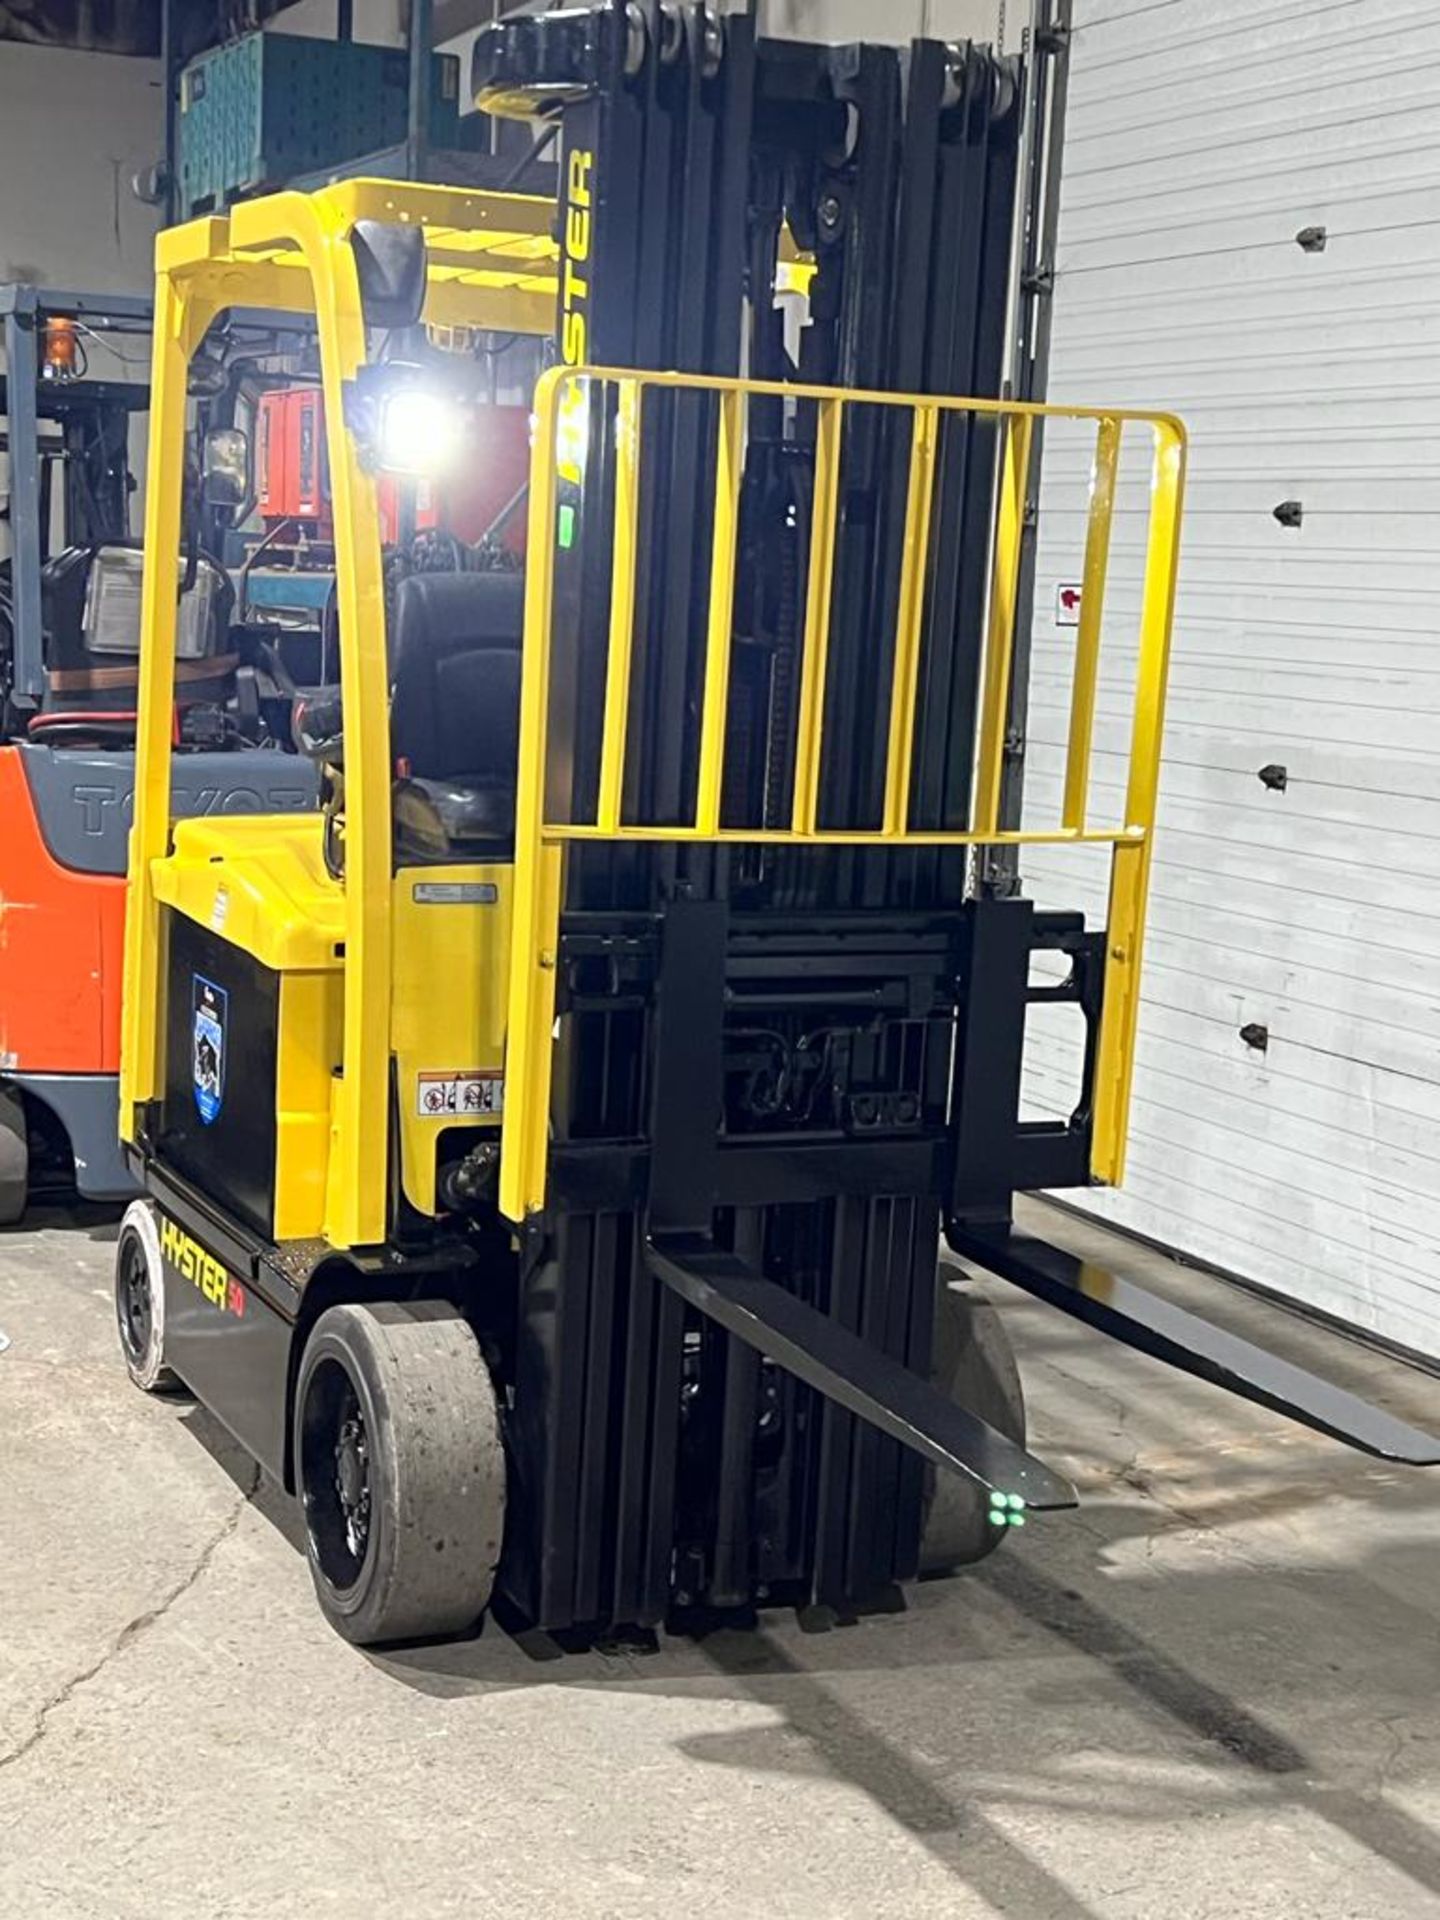 2013 Hyster 5,000lbs Capacity Forklift 4-STAGE MAST Electric 48V with Sideshift & Safety to APR 2024 - Image 2 of 5